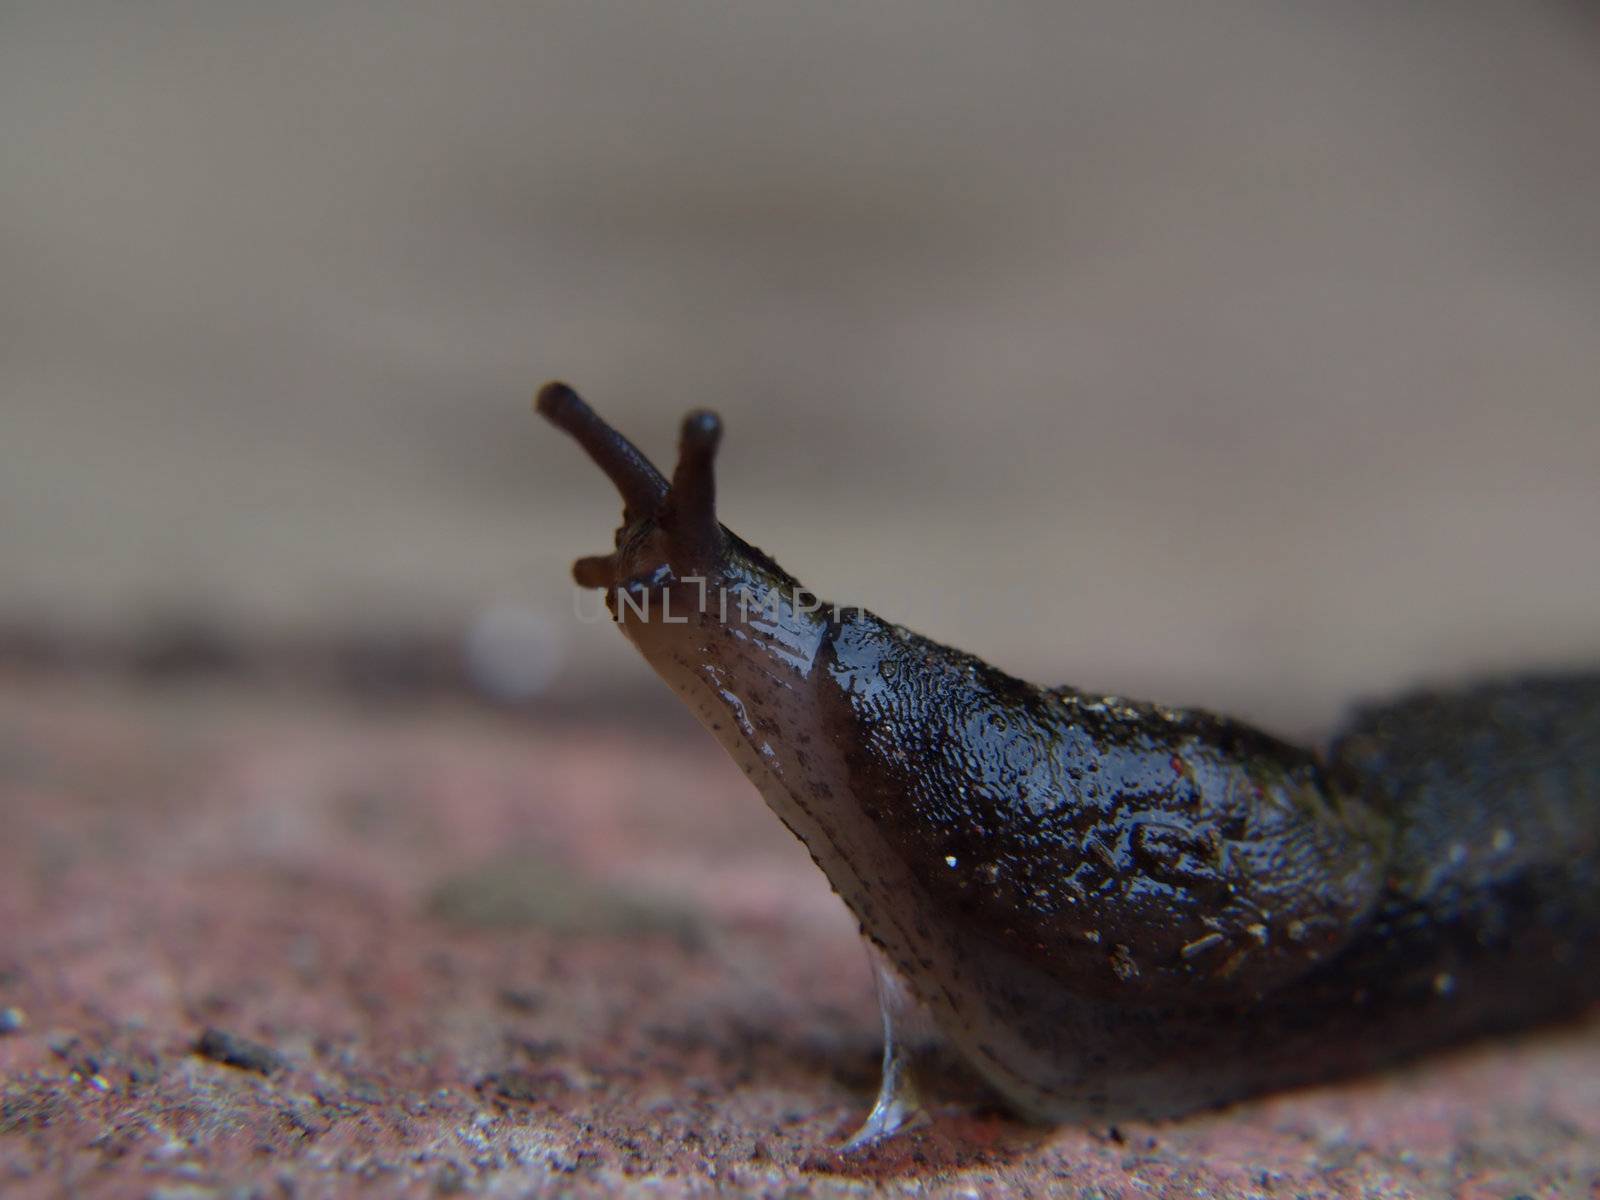 A slug travels across the ground, a slime trail forms underneath it.